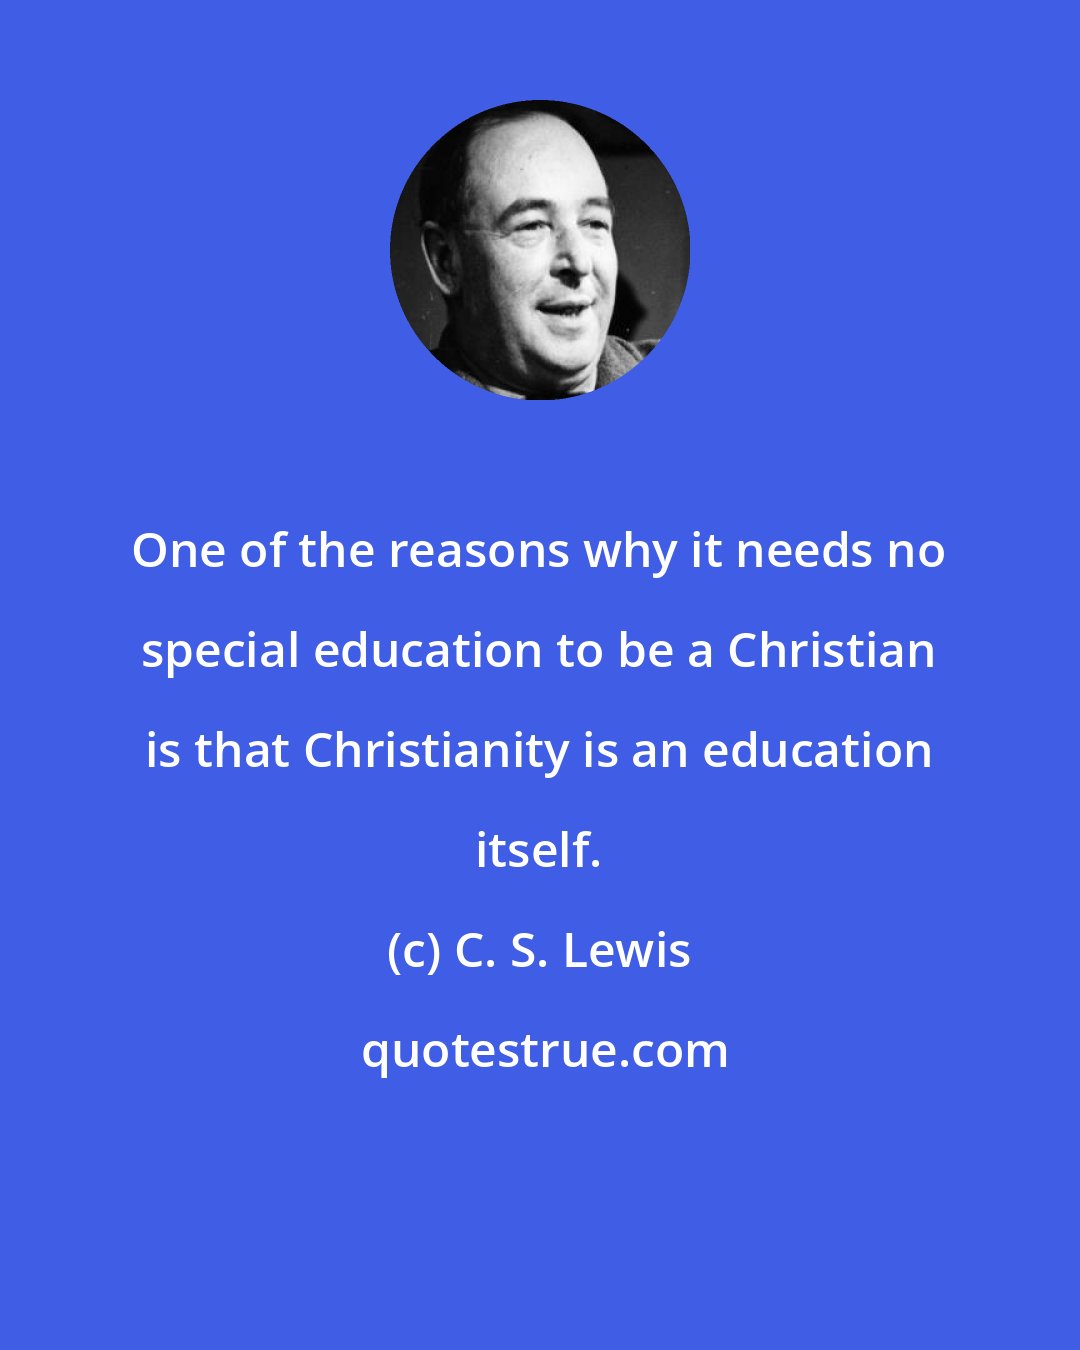 C. S. Lewis: One of the reasons why it needs no special education to be a Christian is that Christianity is an education itself.